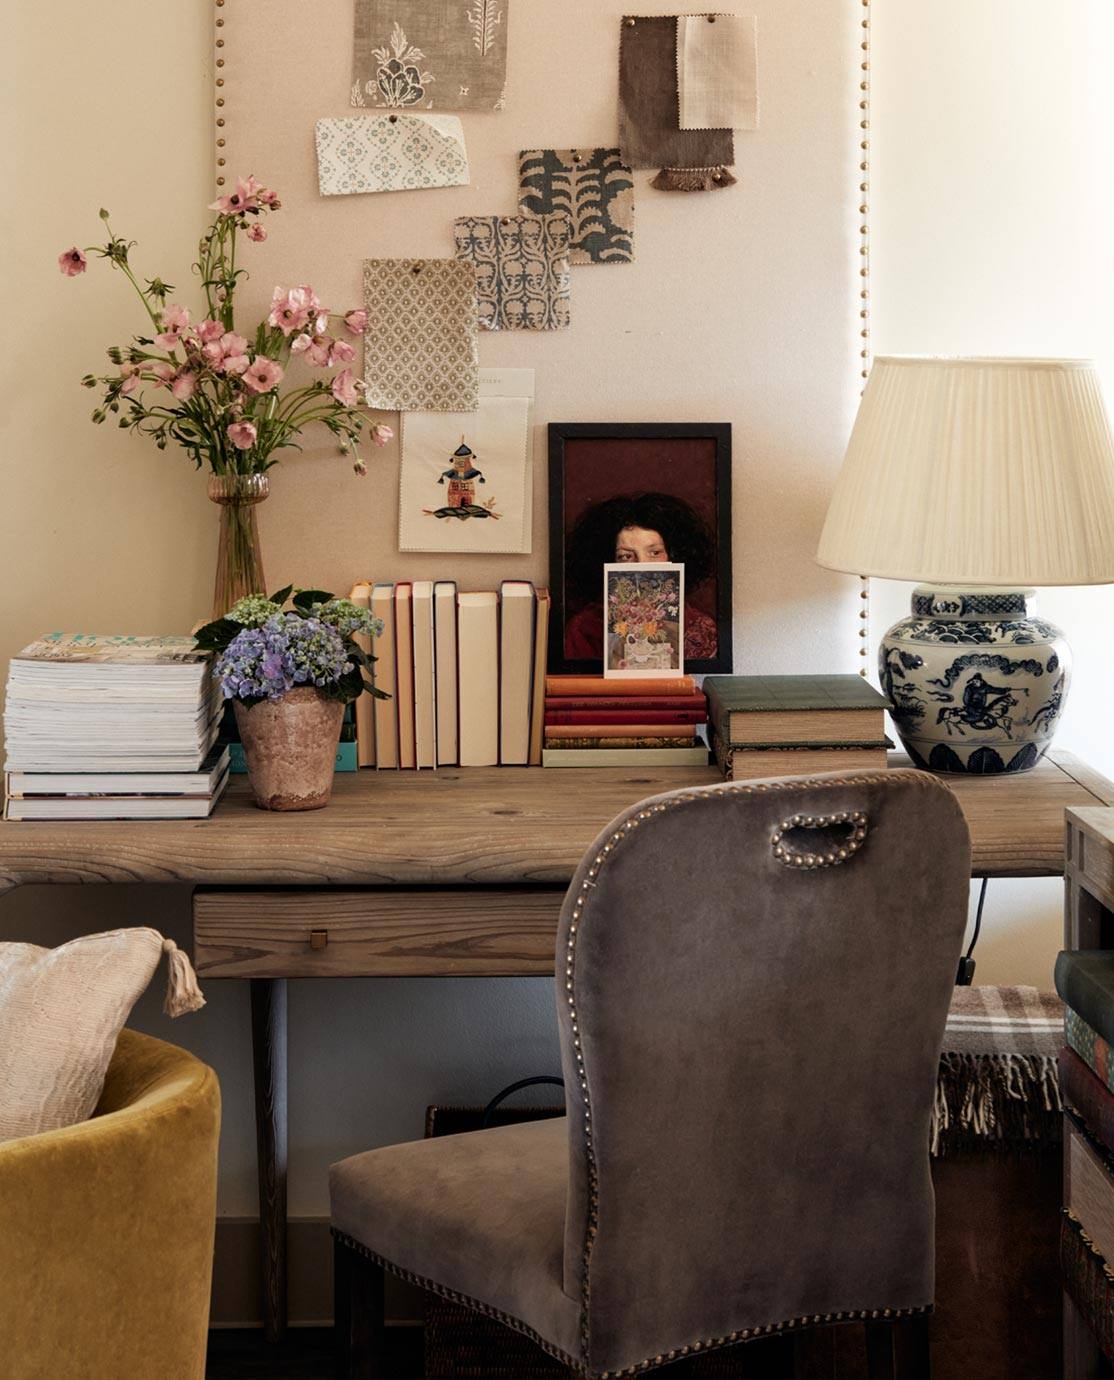 A home study setting with a wooden desk, gray velvet chair and a mood board with fabric samples